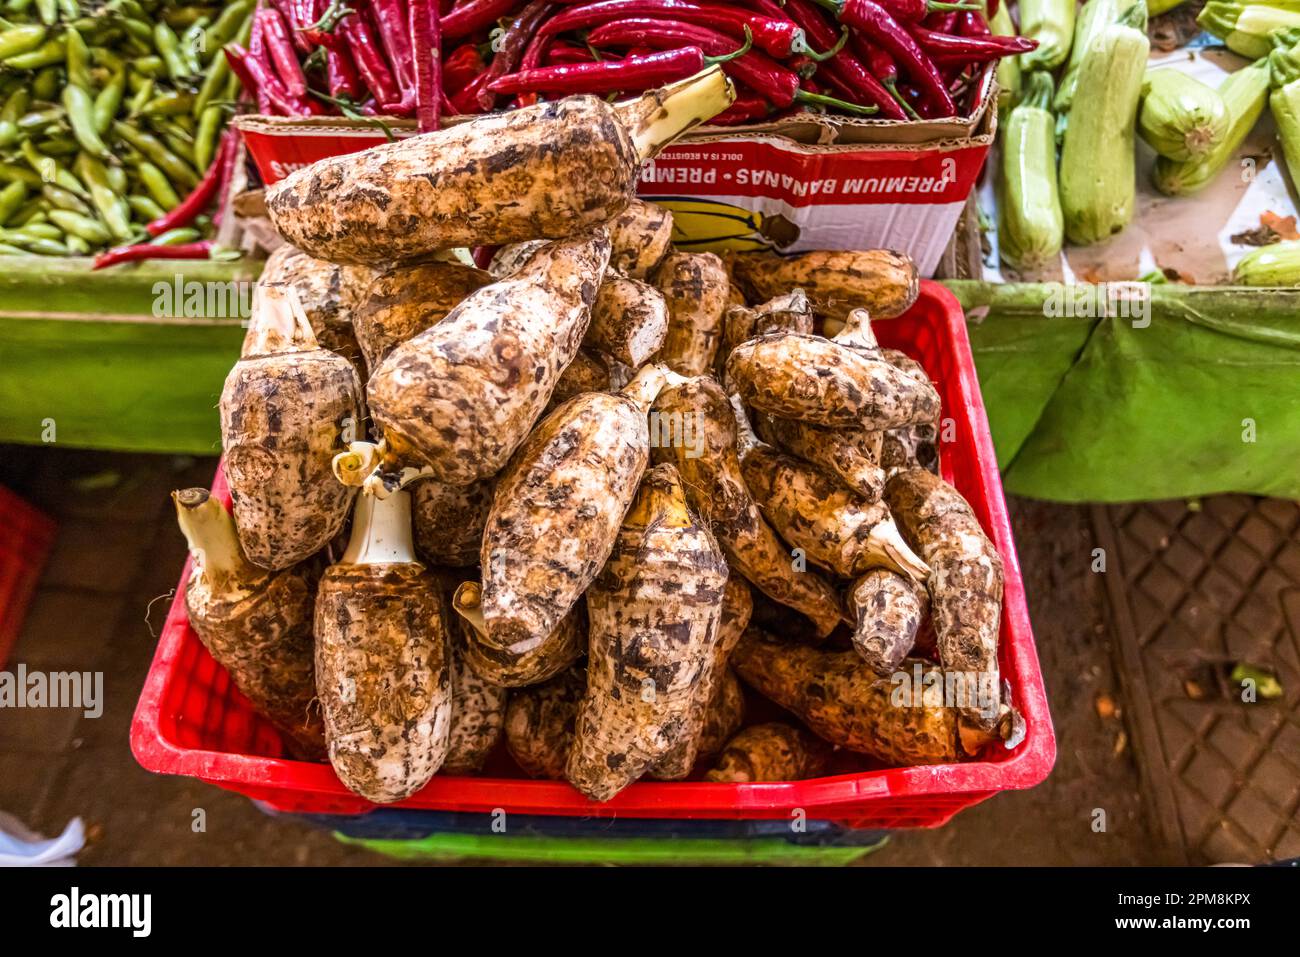 Kolokasi is a Cypriot specialty. The vegetable resembles a mixture of potato and Jerusalem artichoke. It is cut into cubes and served cooked. Nicosia Municipality, Cyprus. In the large market hall, Bandabulya, fresh fruits and vegetables are sold daily Stock Photo